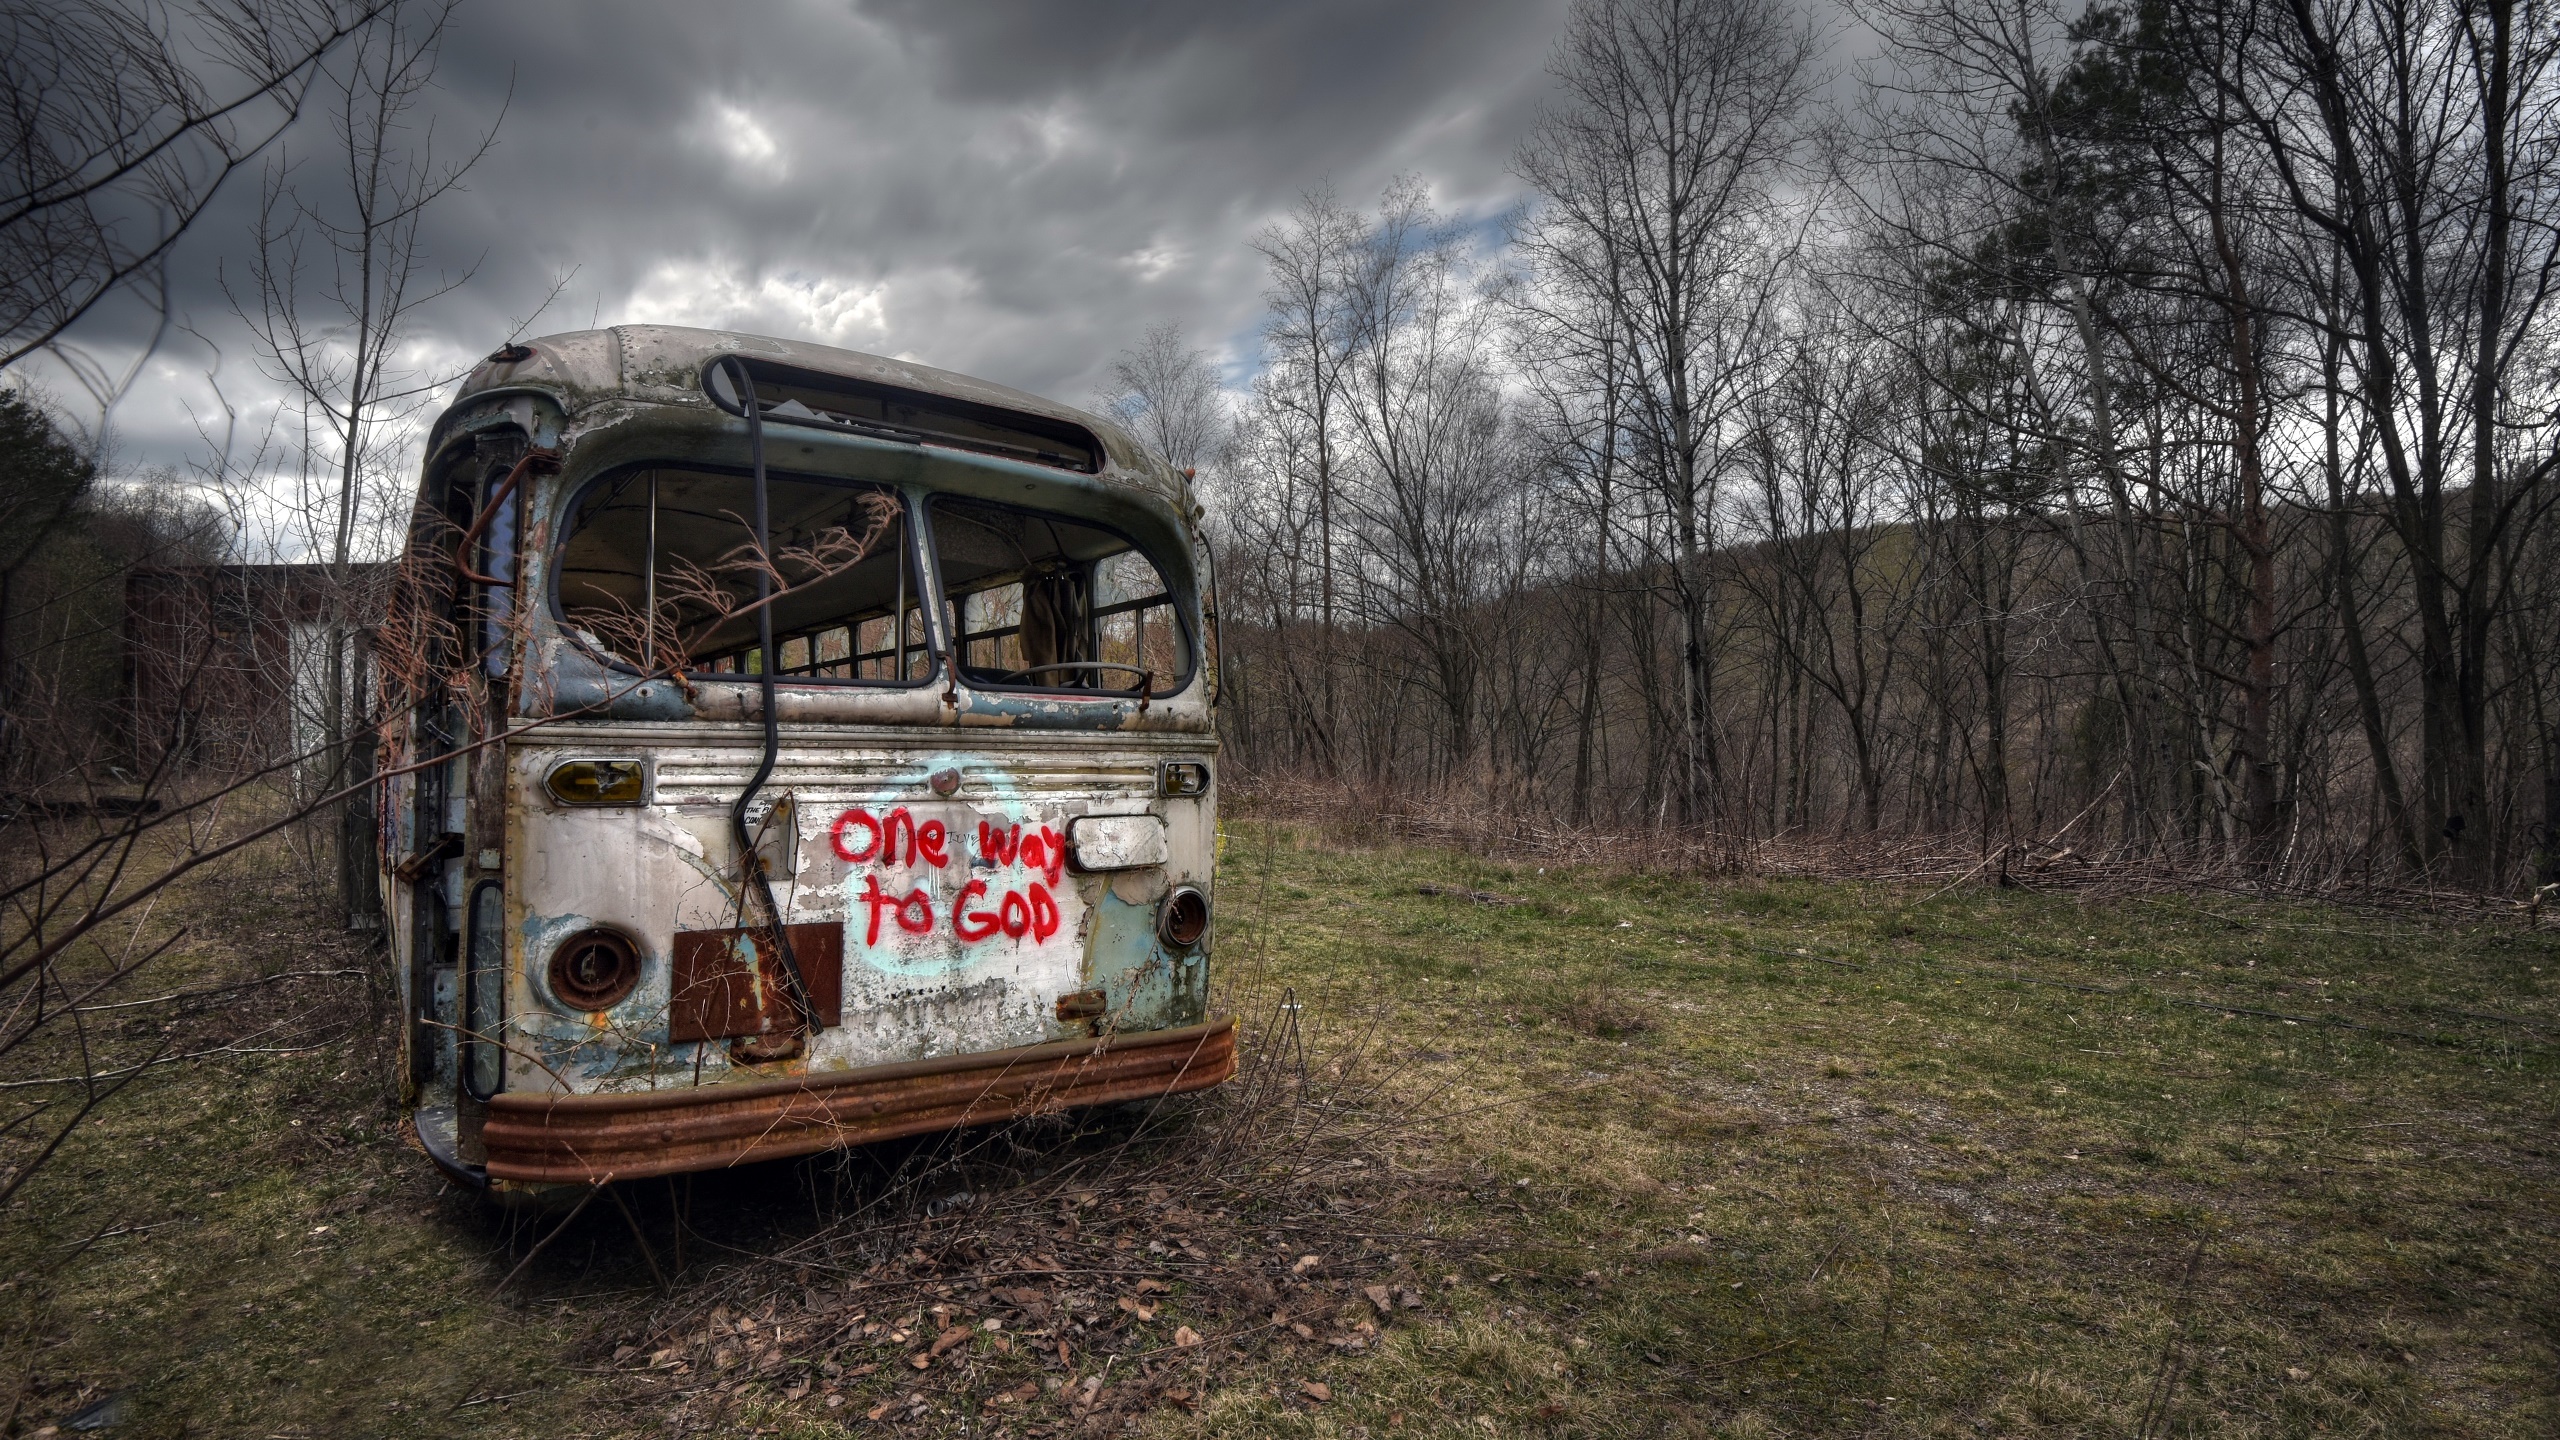 General 2560x1440 buses vehicle wreck forest trees HDR